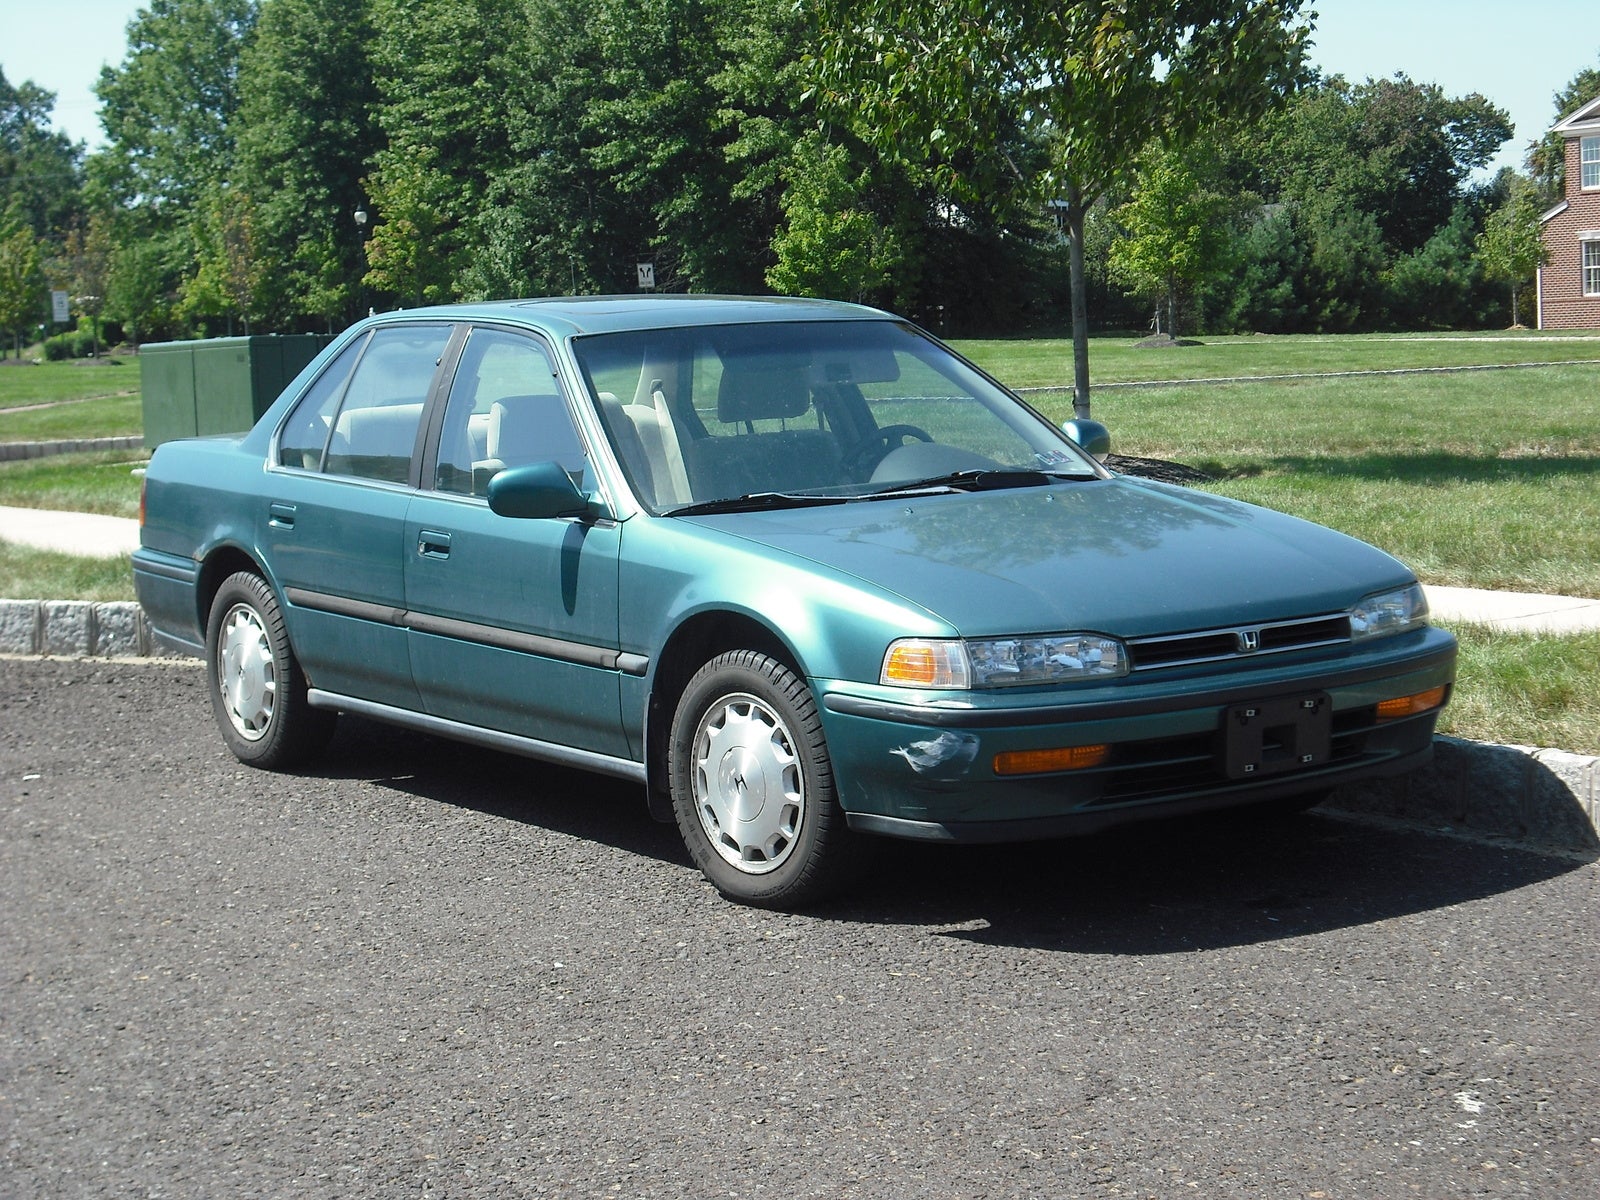 Picture of 1993 honda accord #6